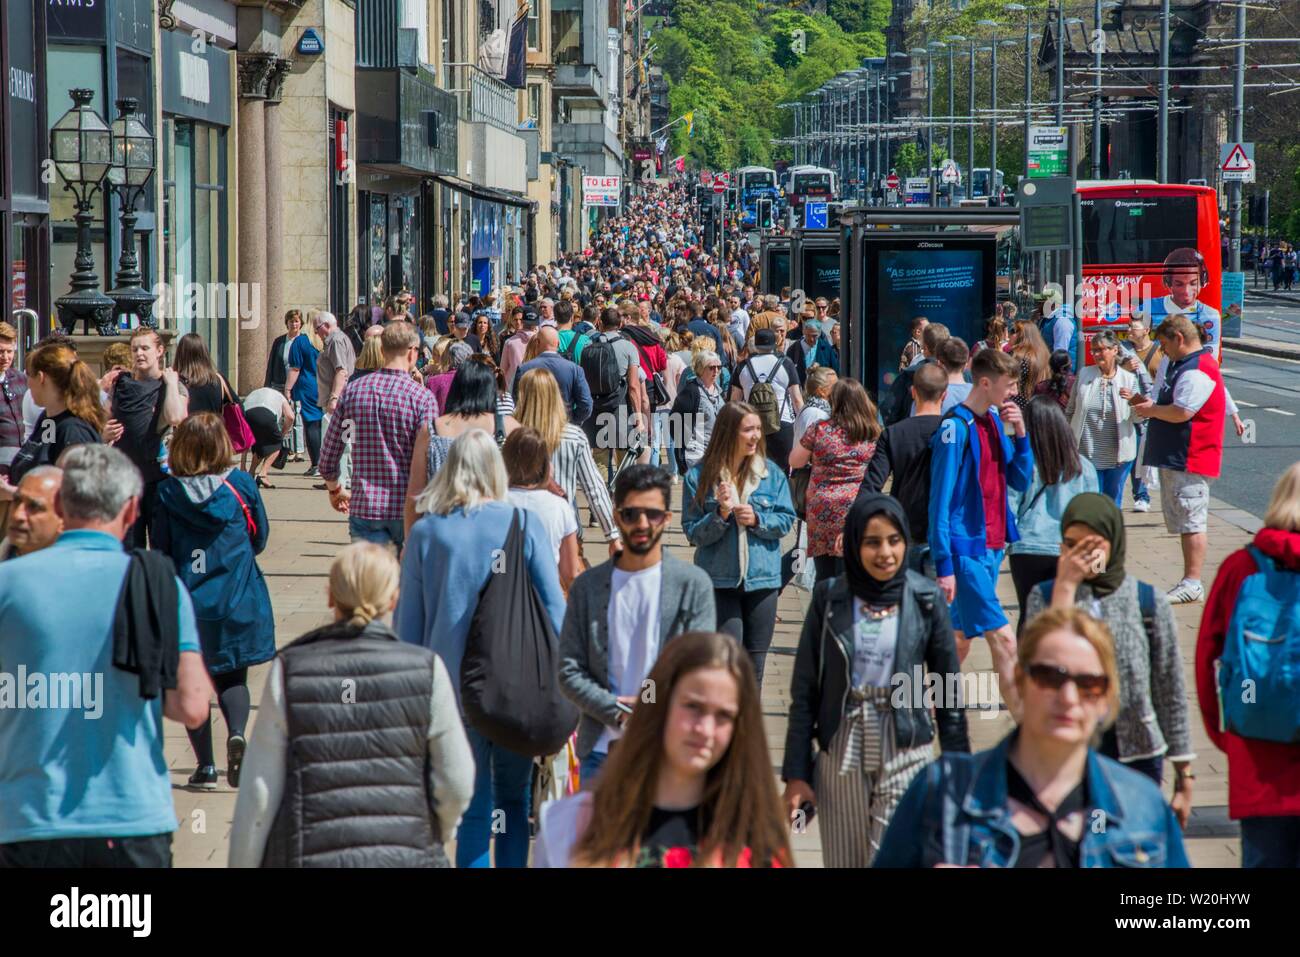 Princes Street, Edinburgh, Scotland UK filled with shoppers on a summer's day. Stock Photo